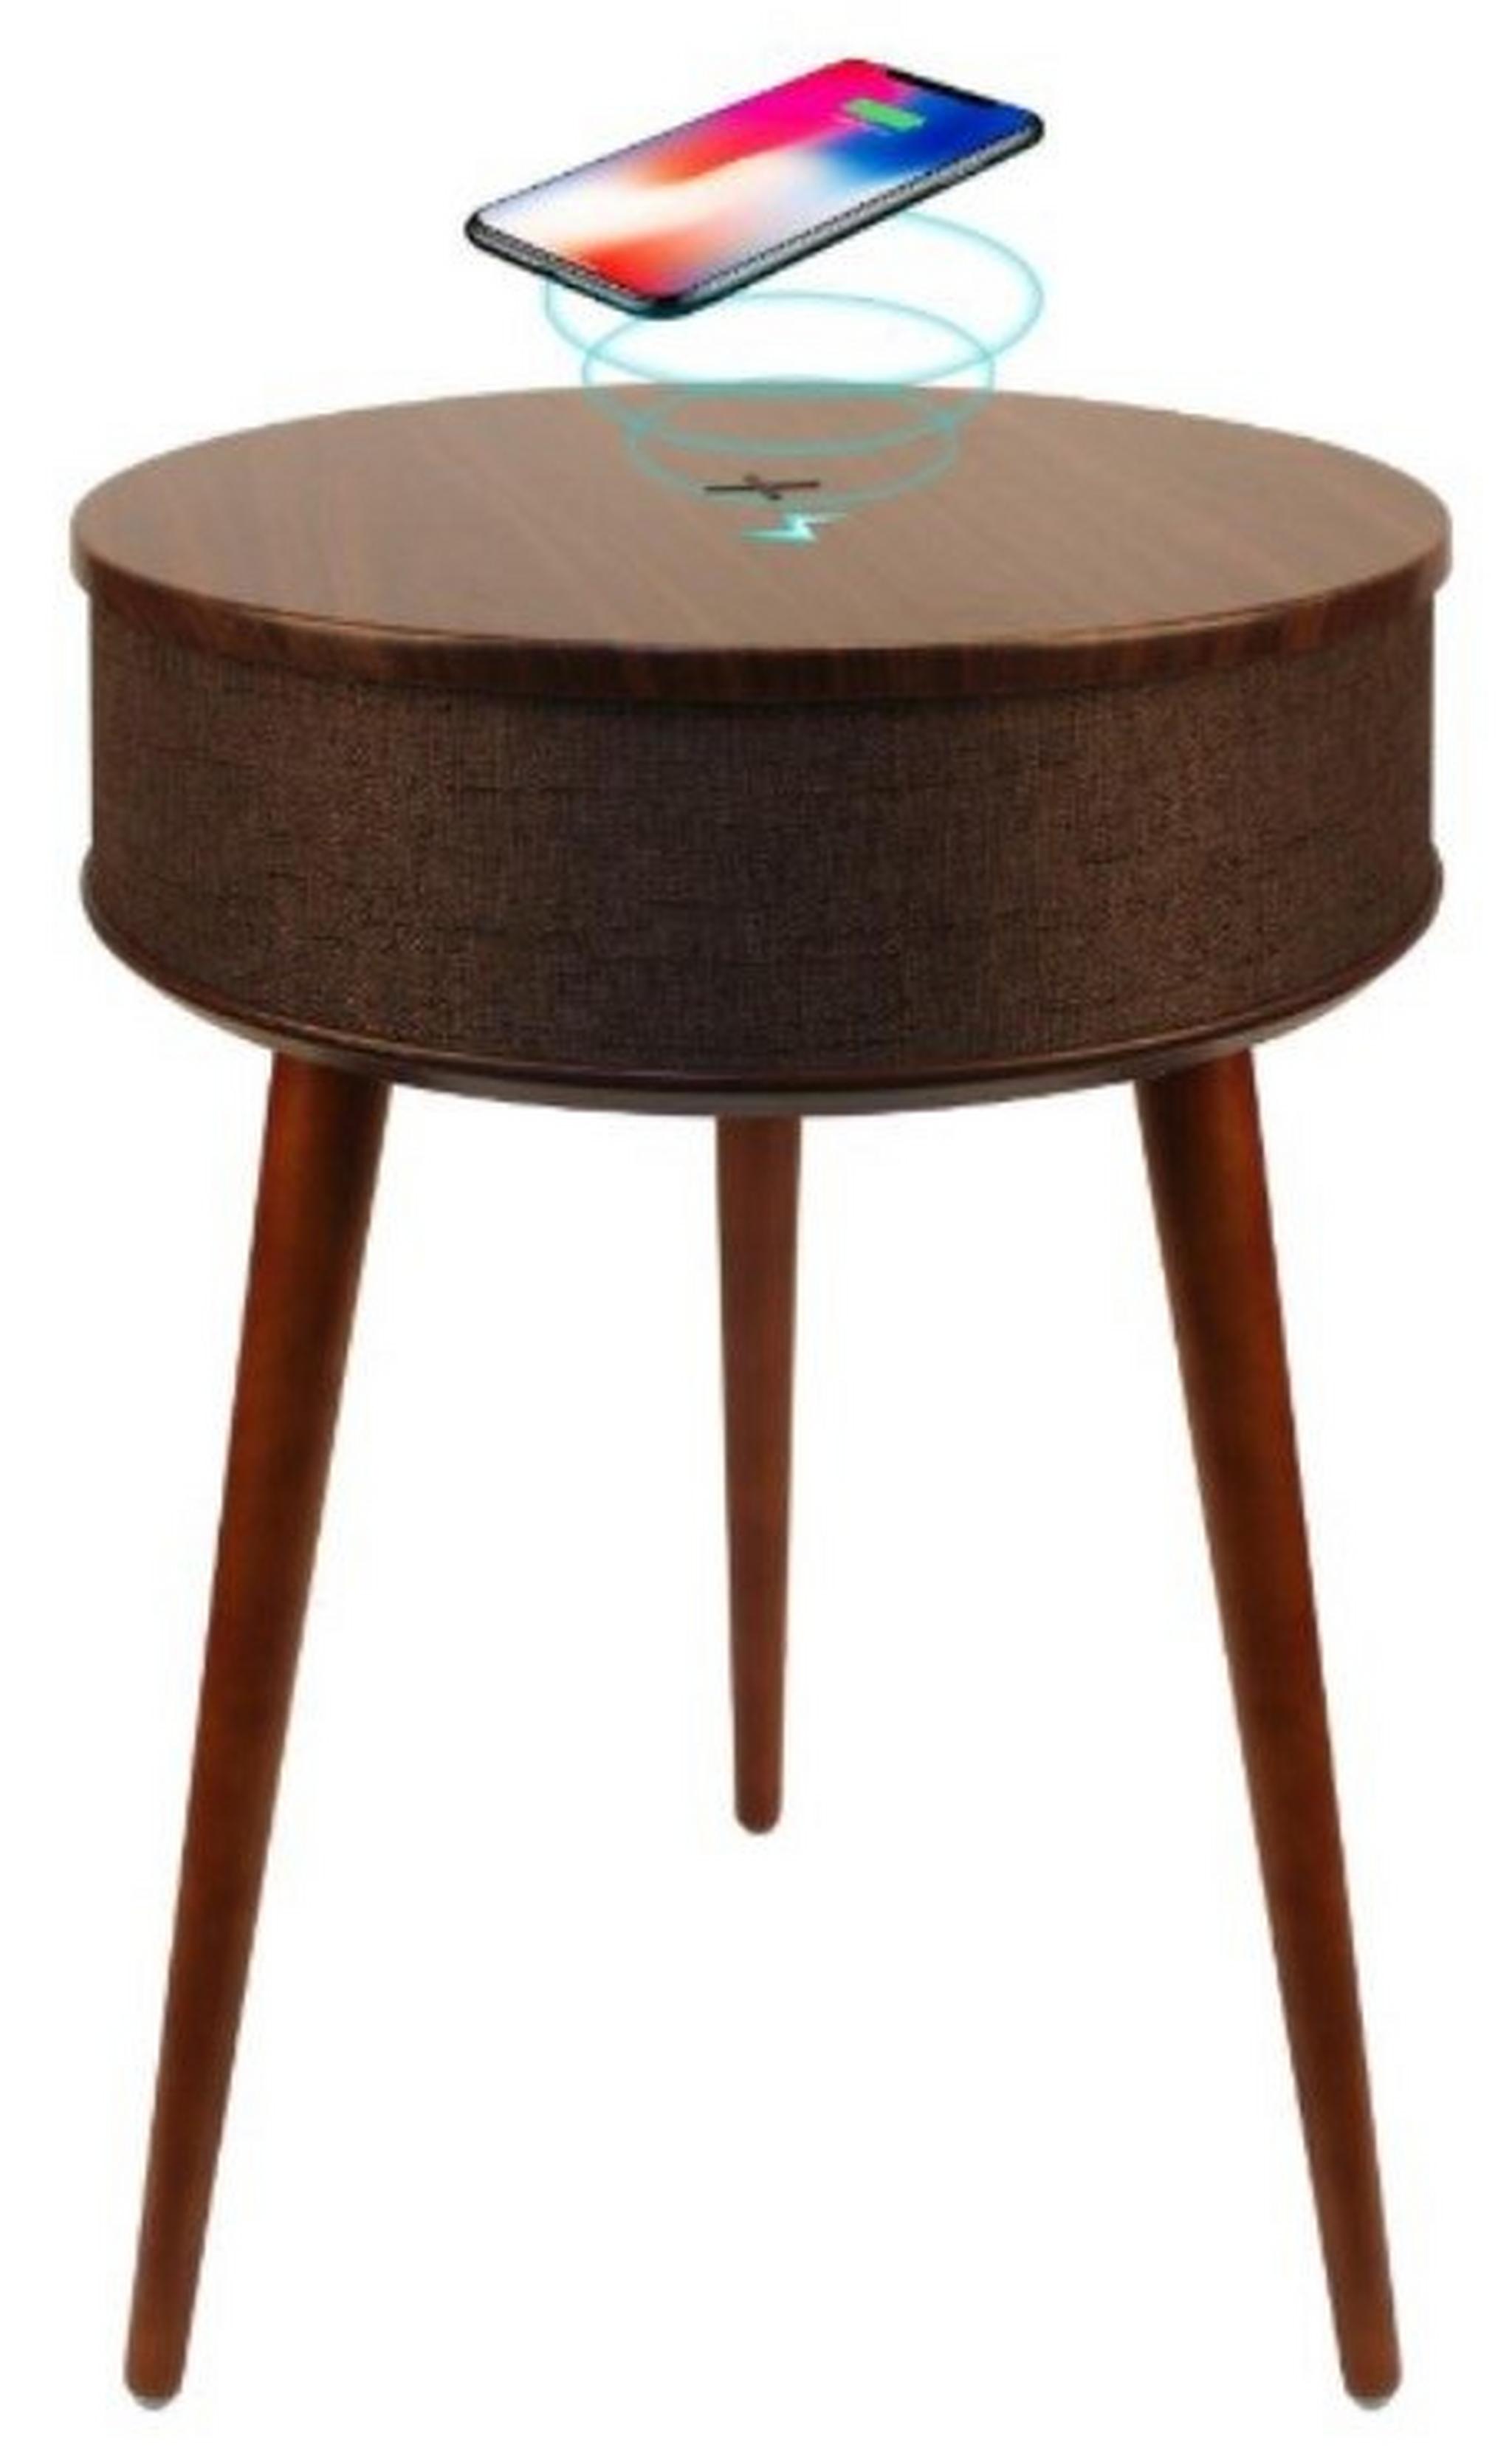 Wansa Round Table with Wireless Speaker (AT600)